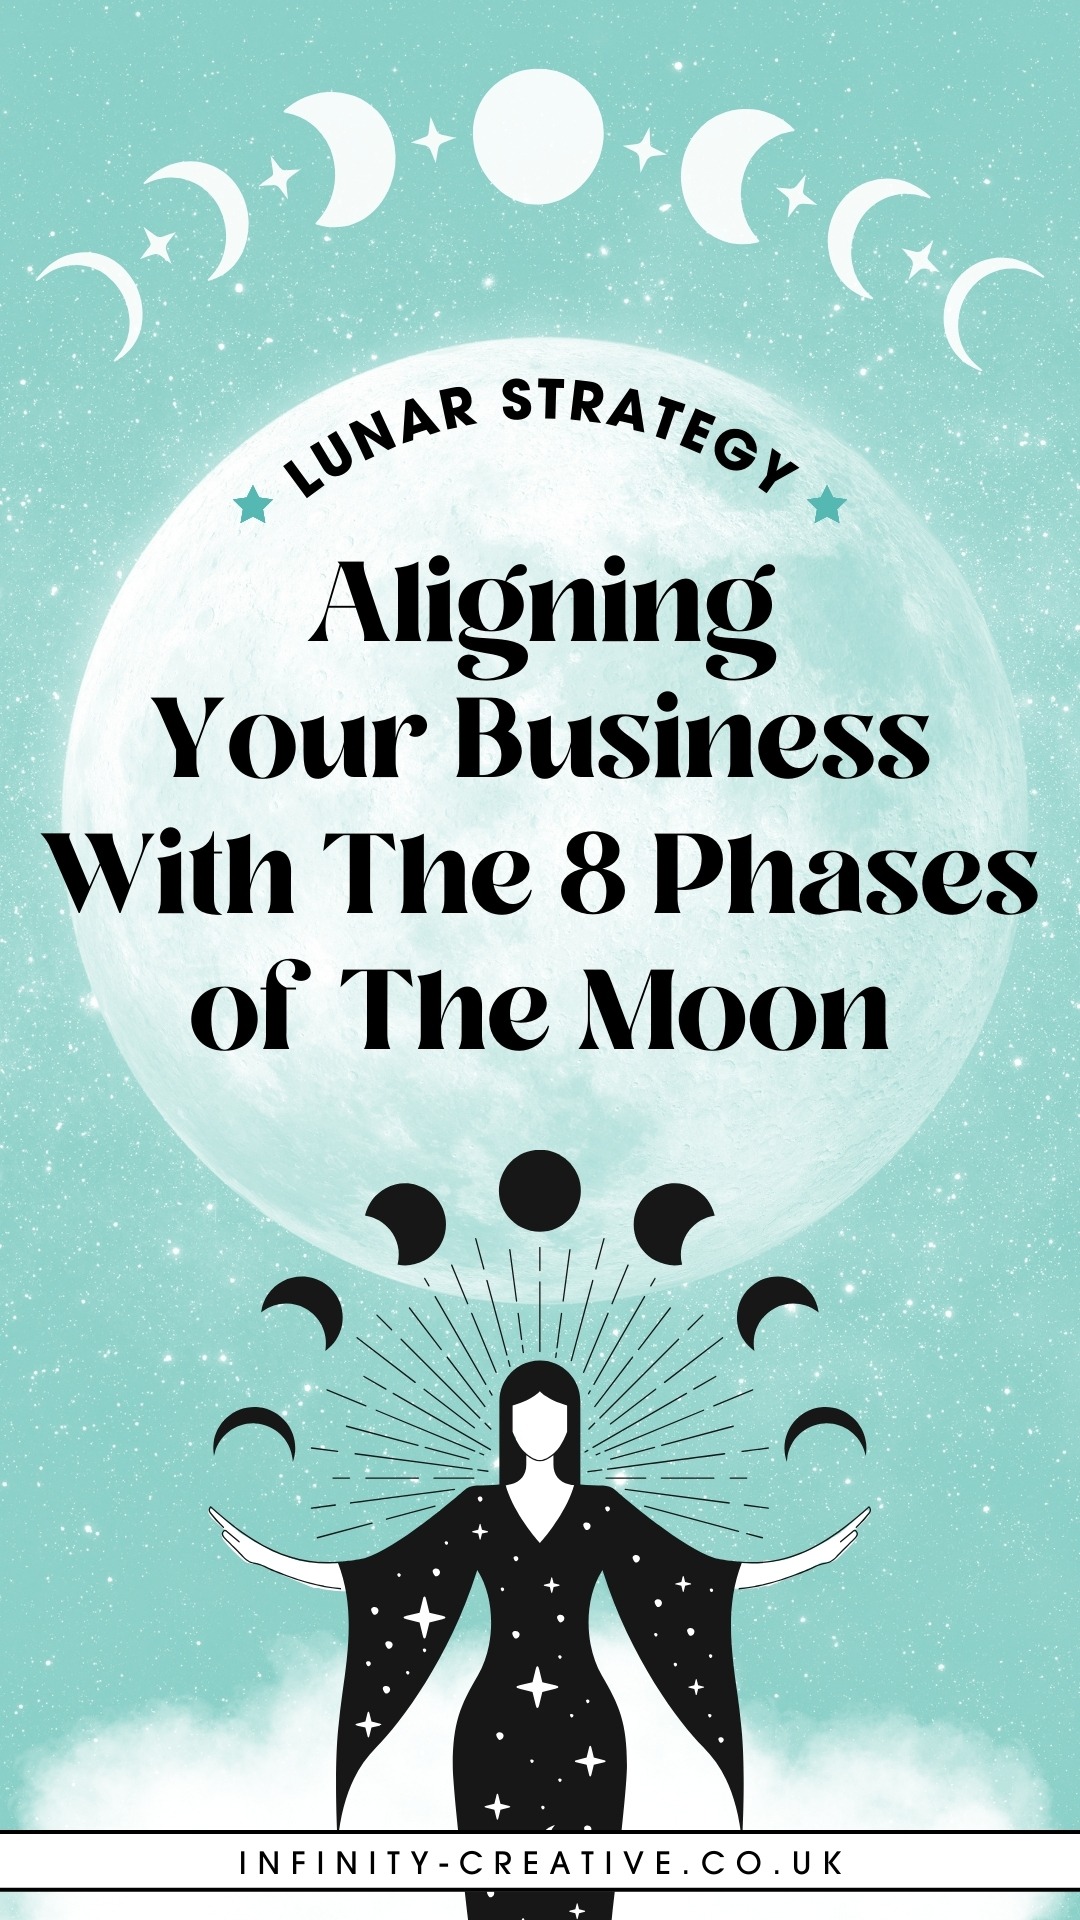 Lunar Strategy Aligning Your Business with the 8 Phases of The Moon | Infinity Creative